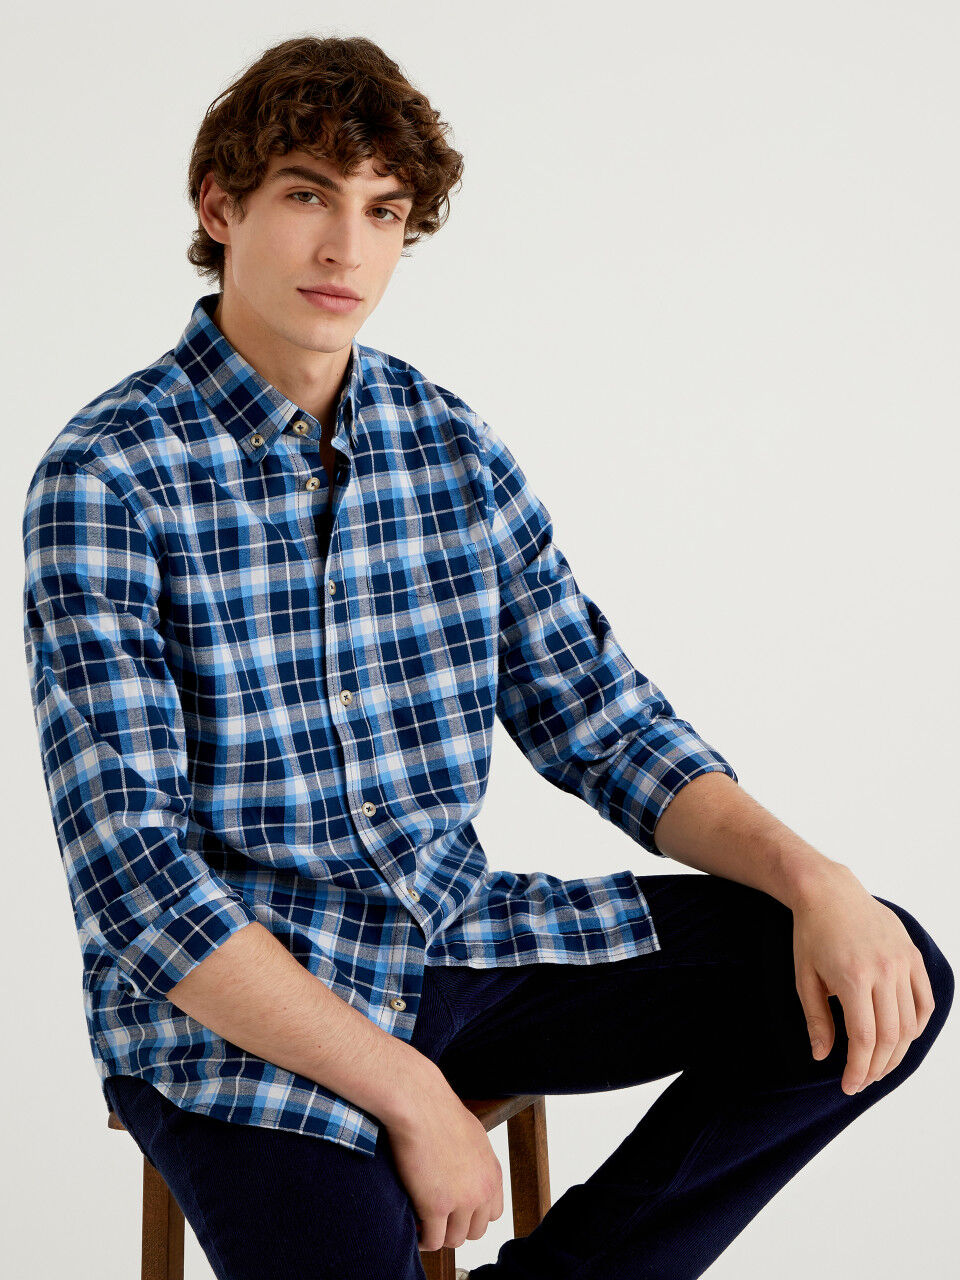 Men's Shirts New Collection 2022 | Benetton